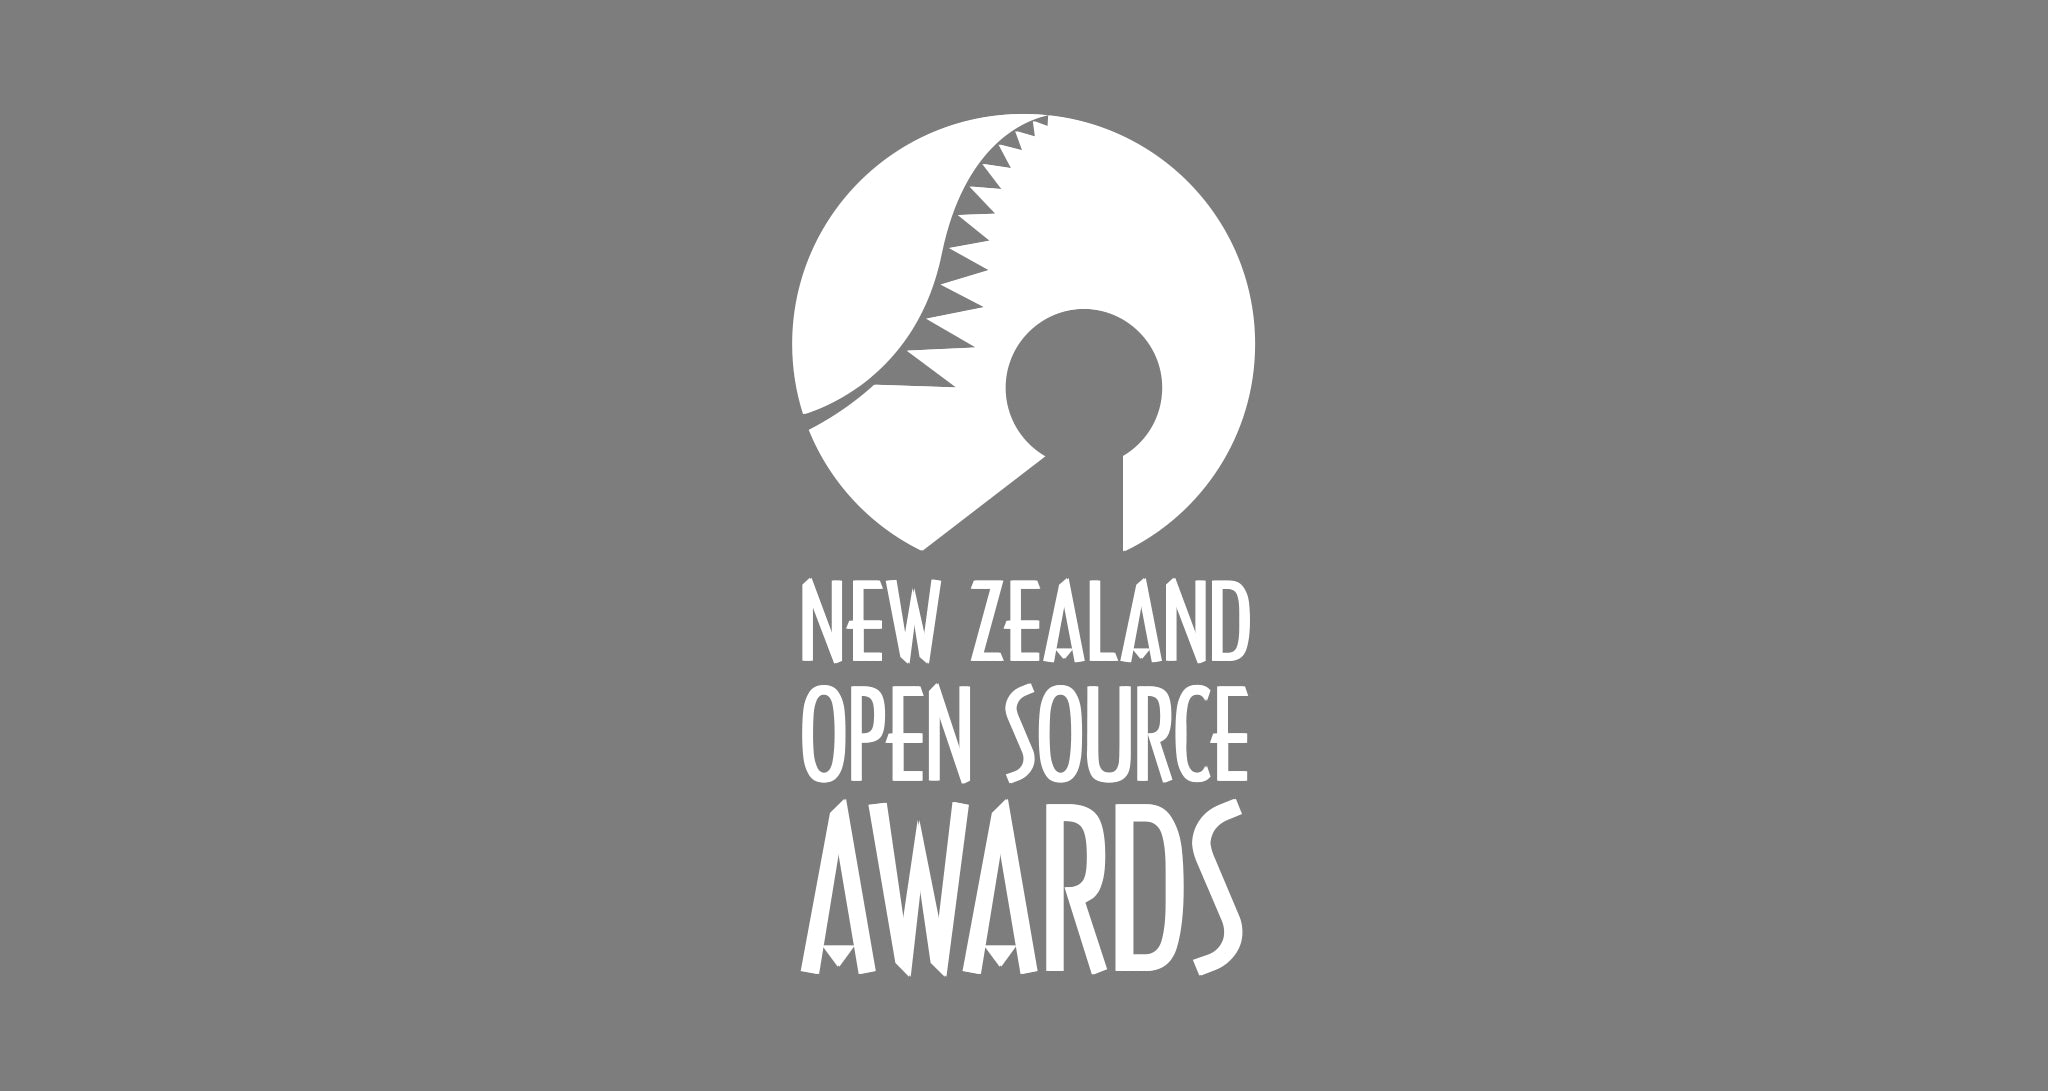 Vote for ClearFoundation in the New Zealand Open Source Awards